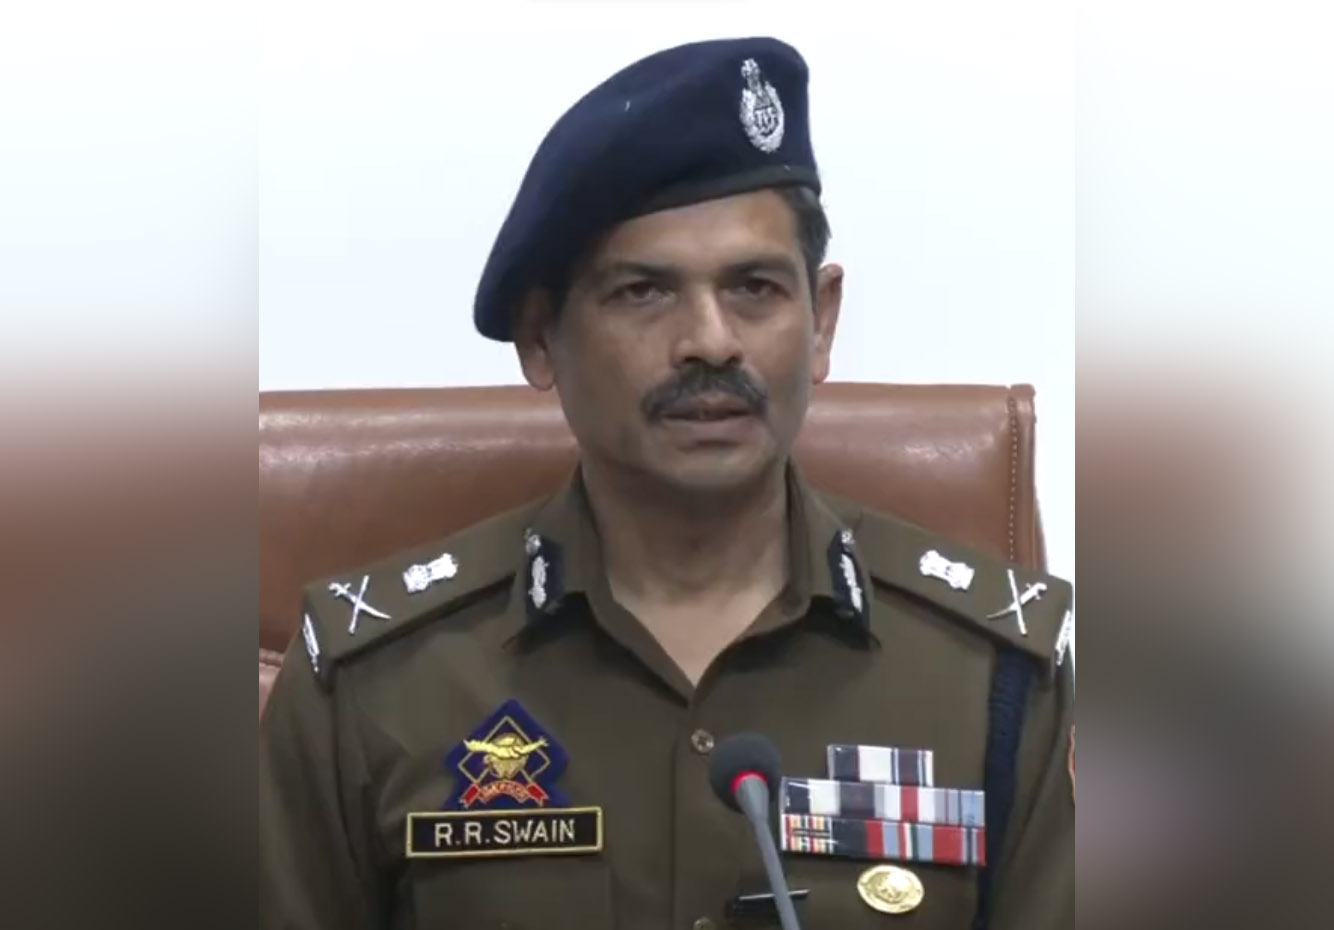 Posting Social Media Content material That Promotes Disharmony Will Quickly Be Criminalised In J&Okay: DGP